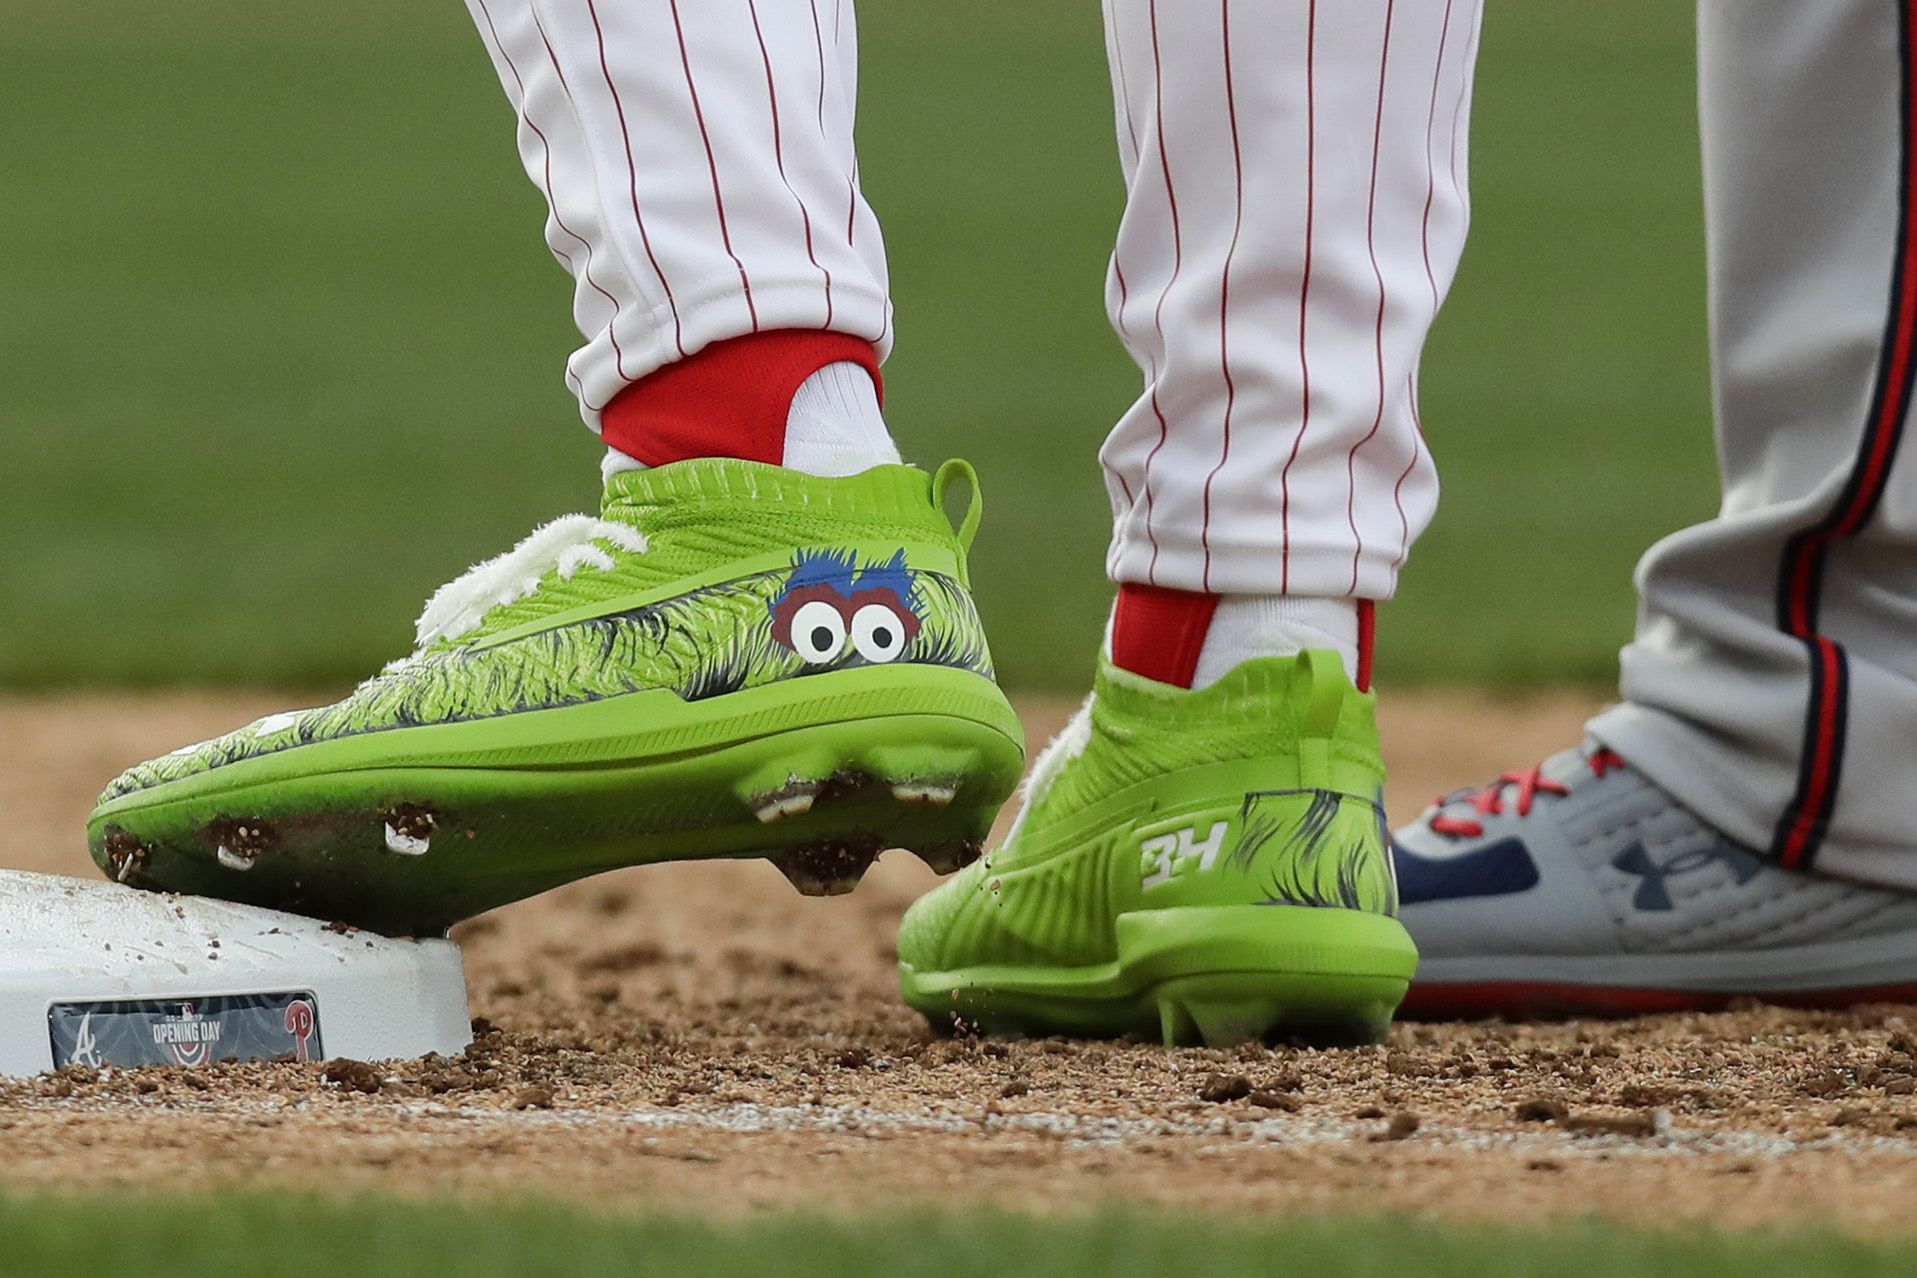 The story behind Phillies star Bryce Harper's new Phanatic-themed cleats